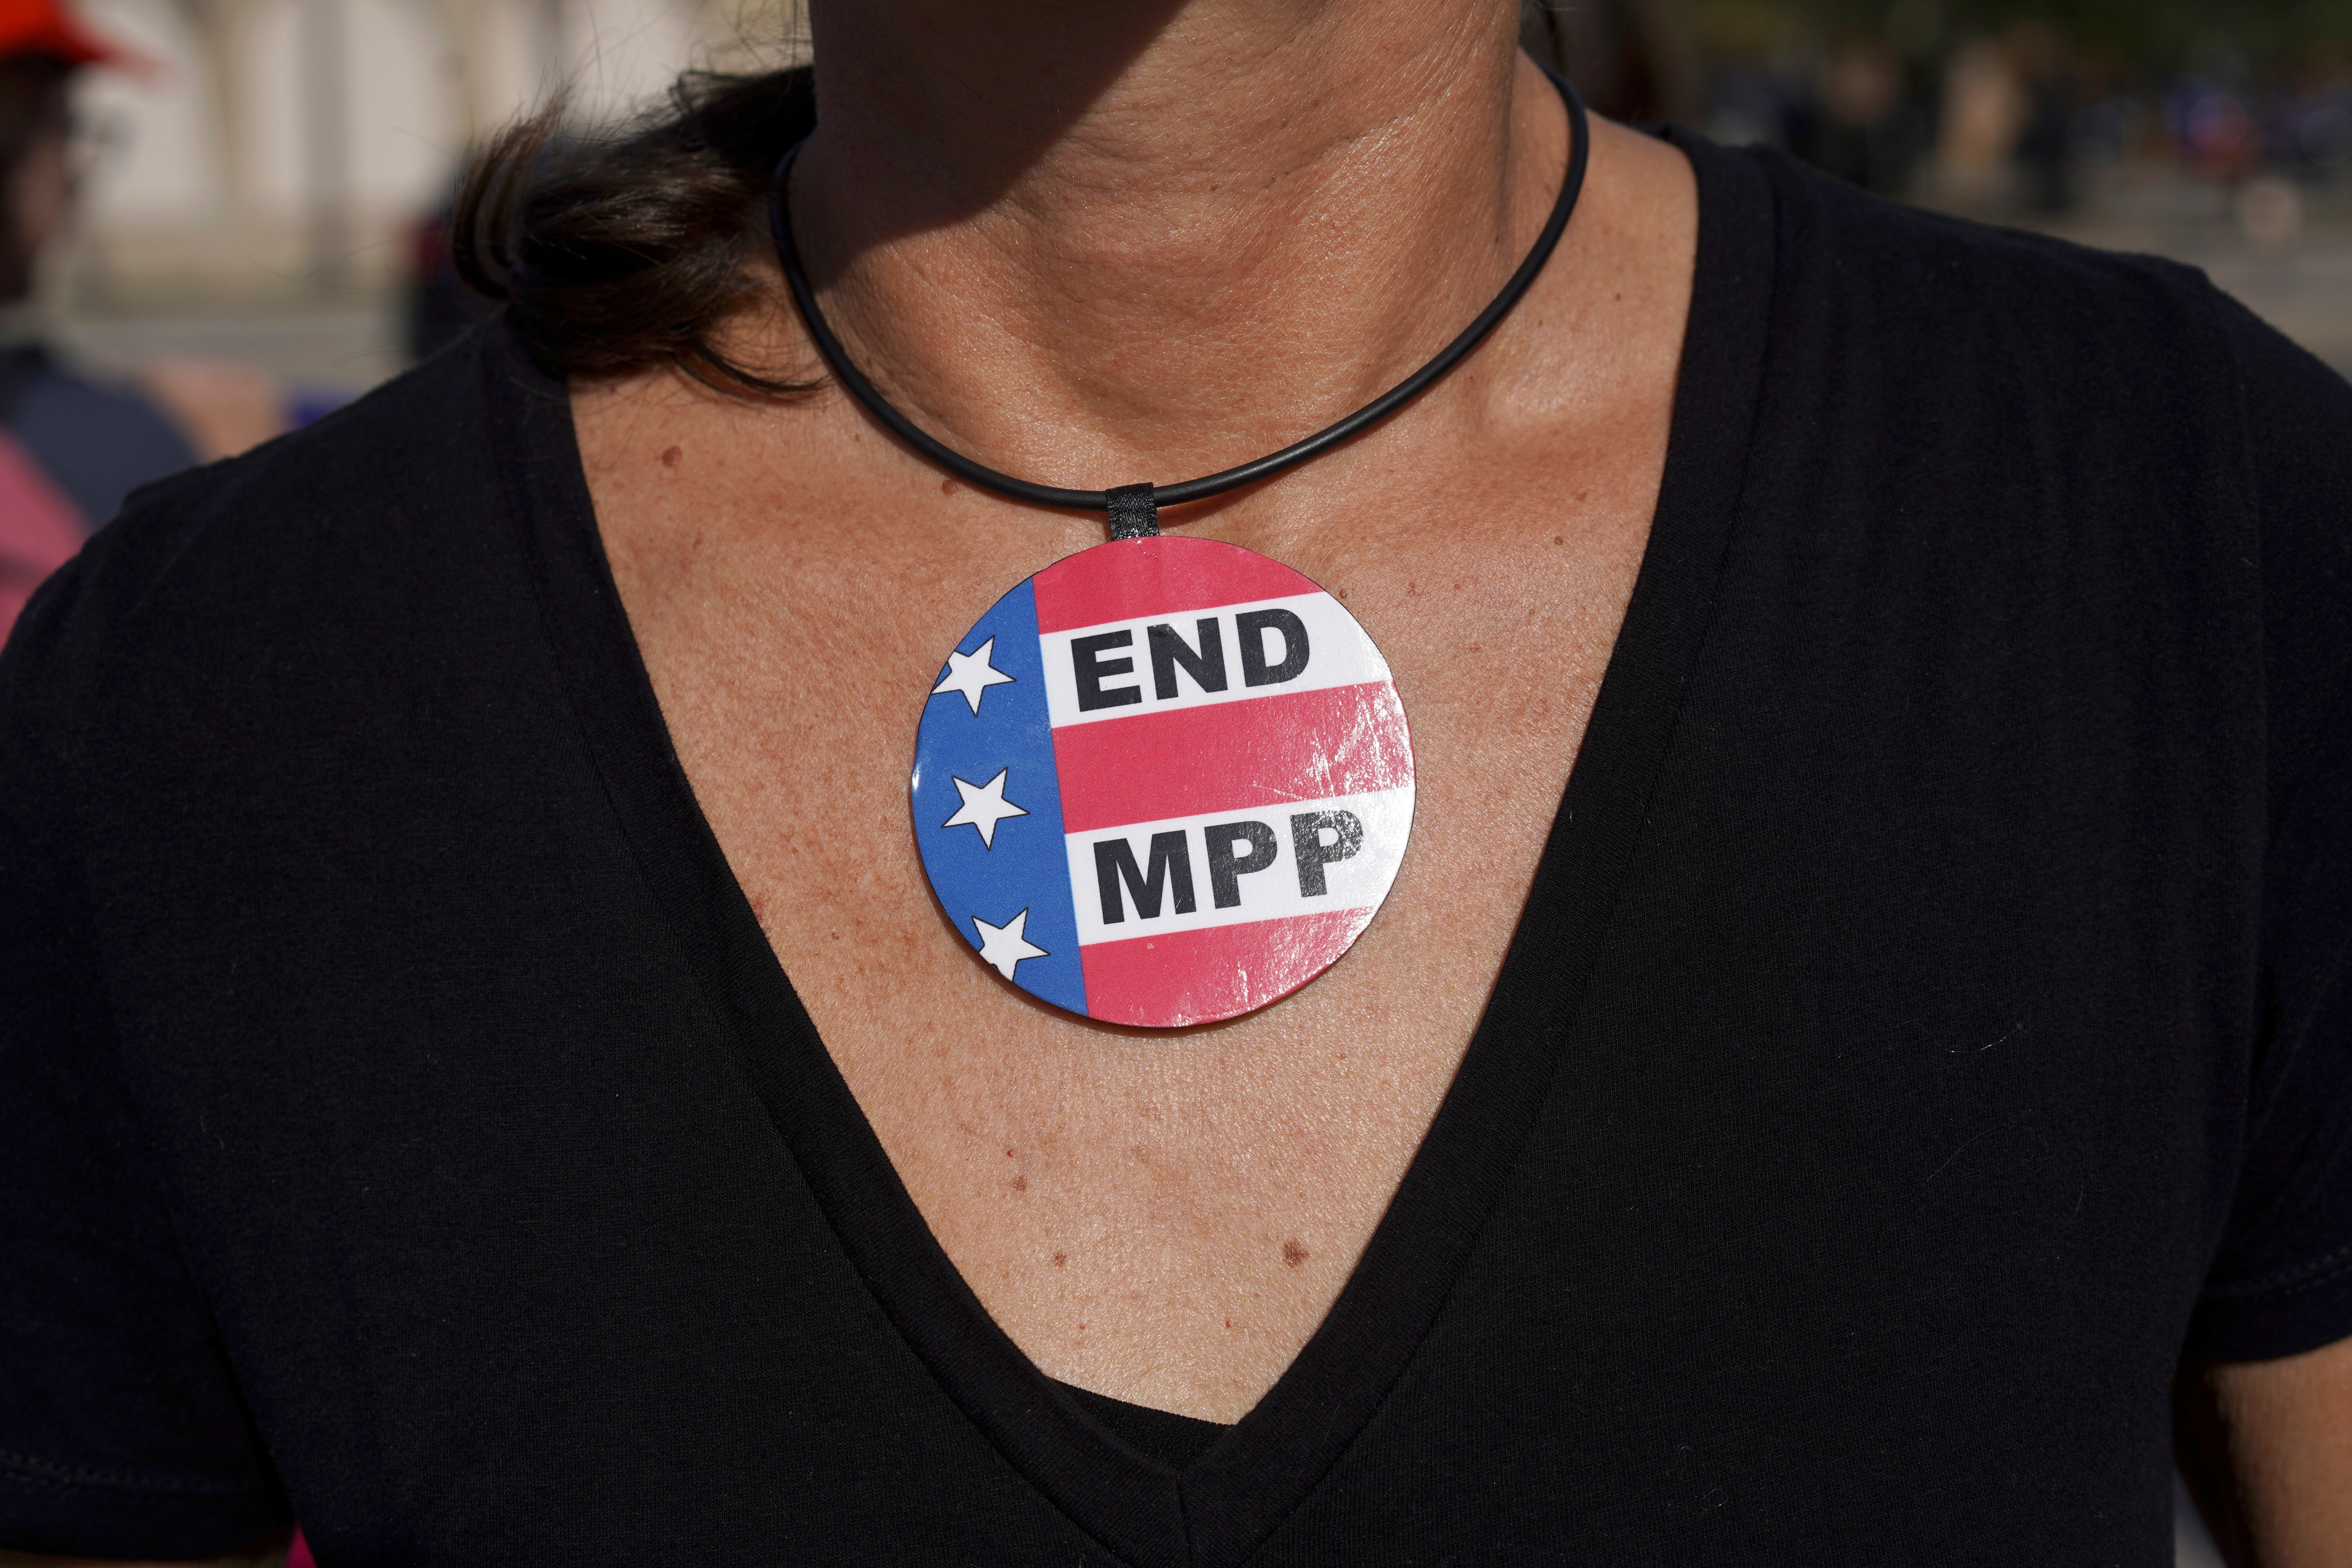 A demonstrator outside a U.S. Customs and Border Protection building in Brownsville, Texas, wears a necklace that reads "END MPP," to protest against Migrant Protection Protocols Jan. 12, 2020. (CNS photo/Go Nakamura, Reuters)